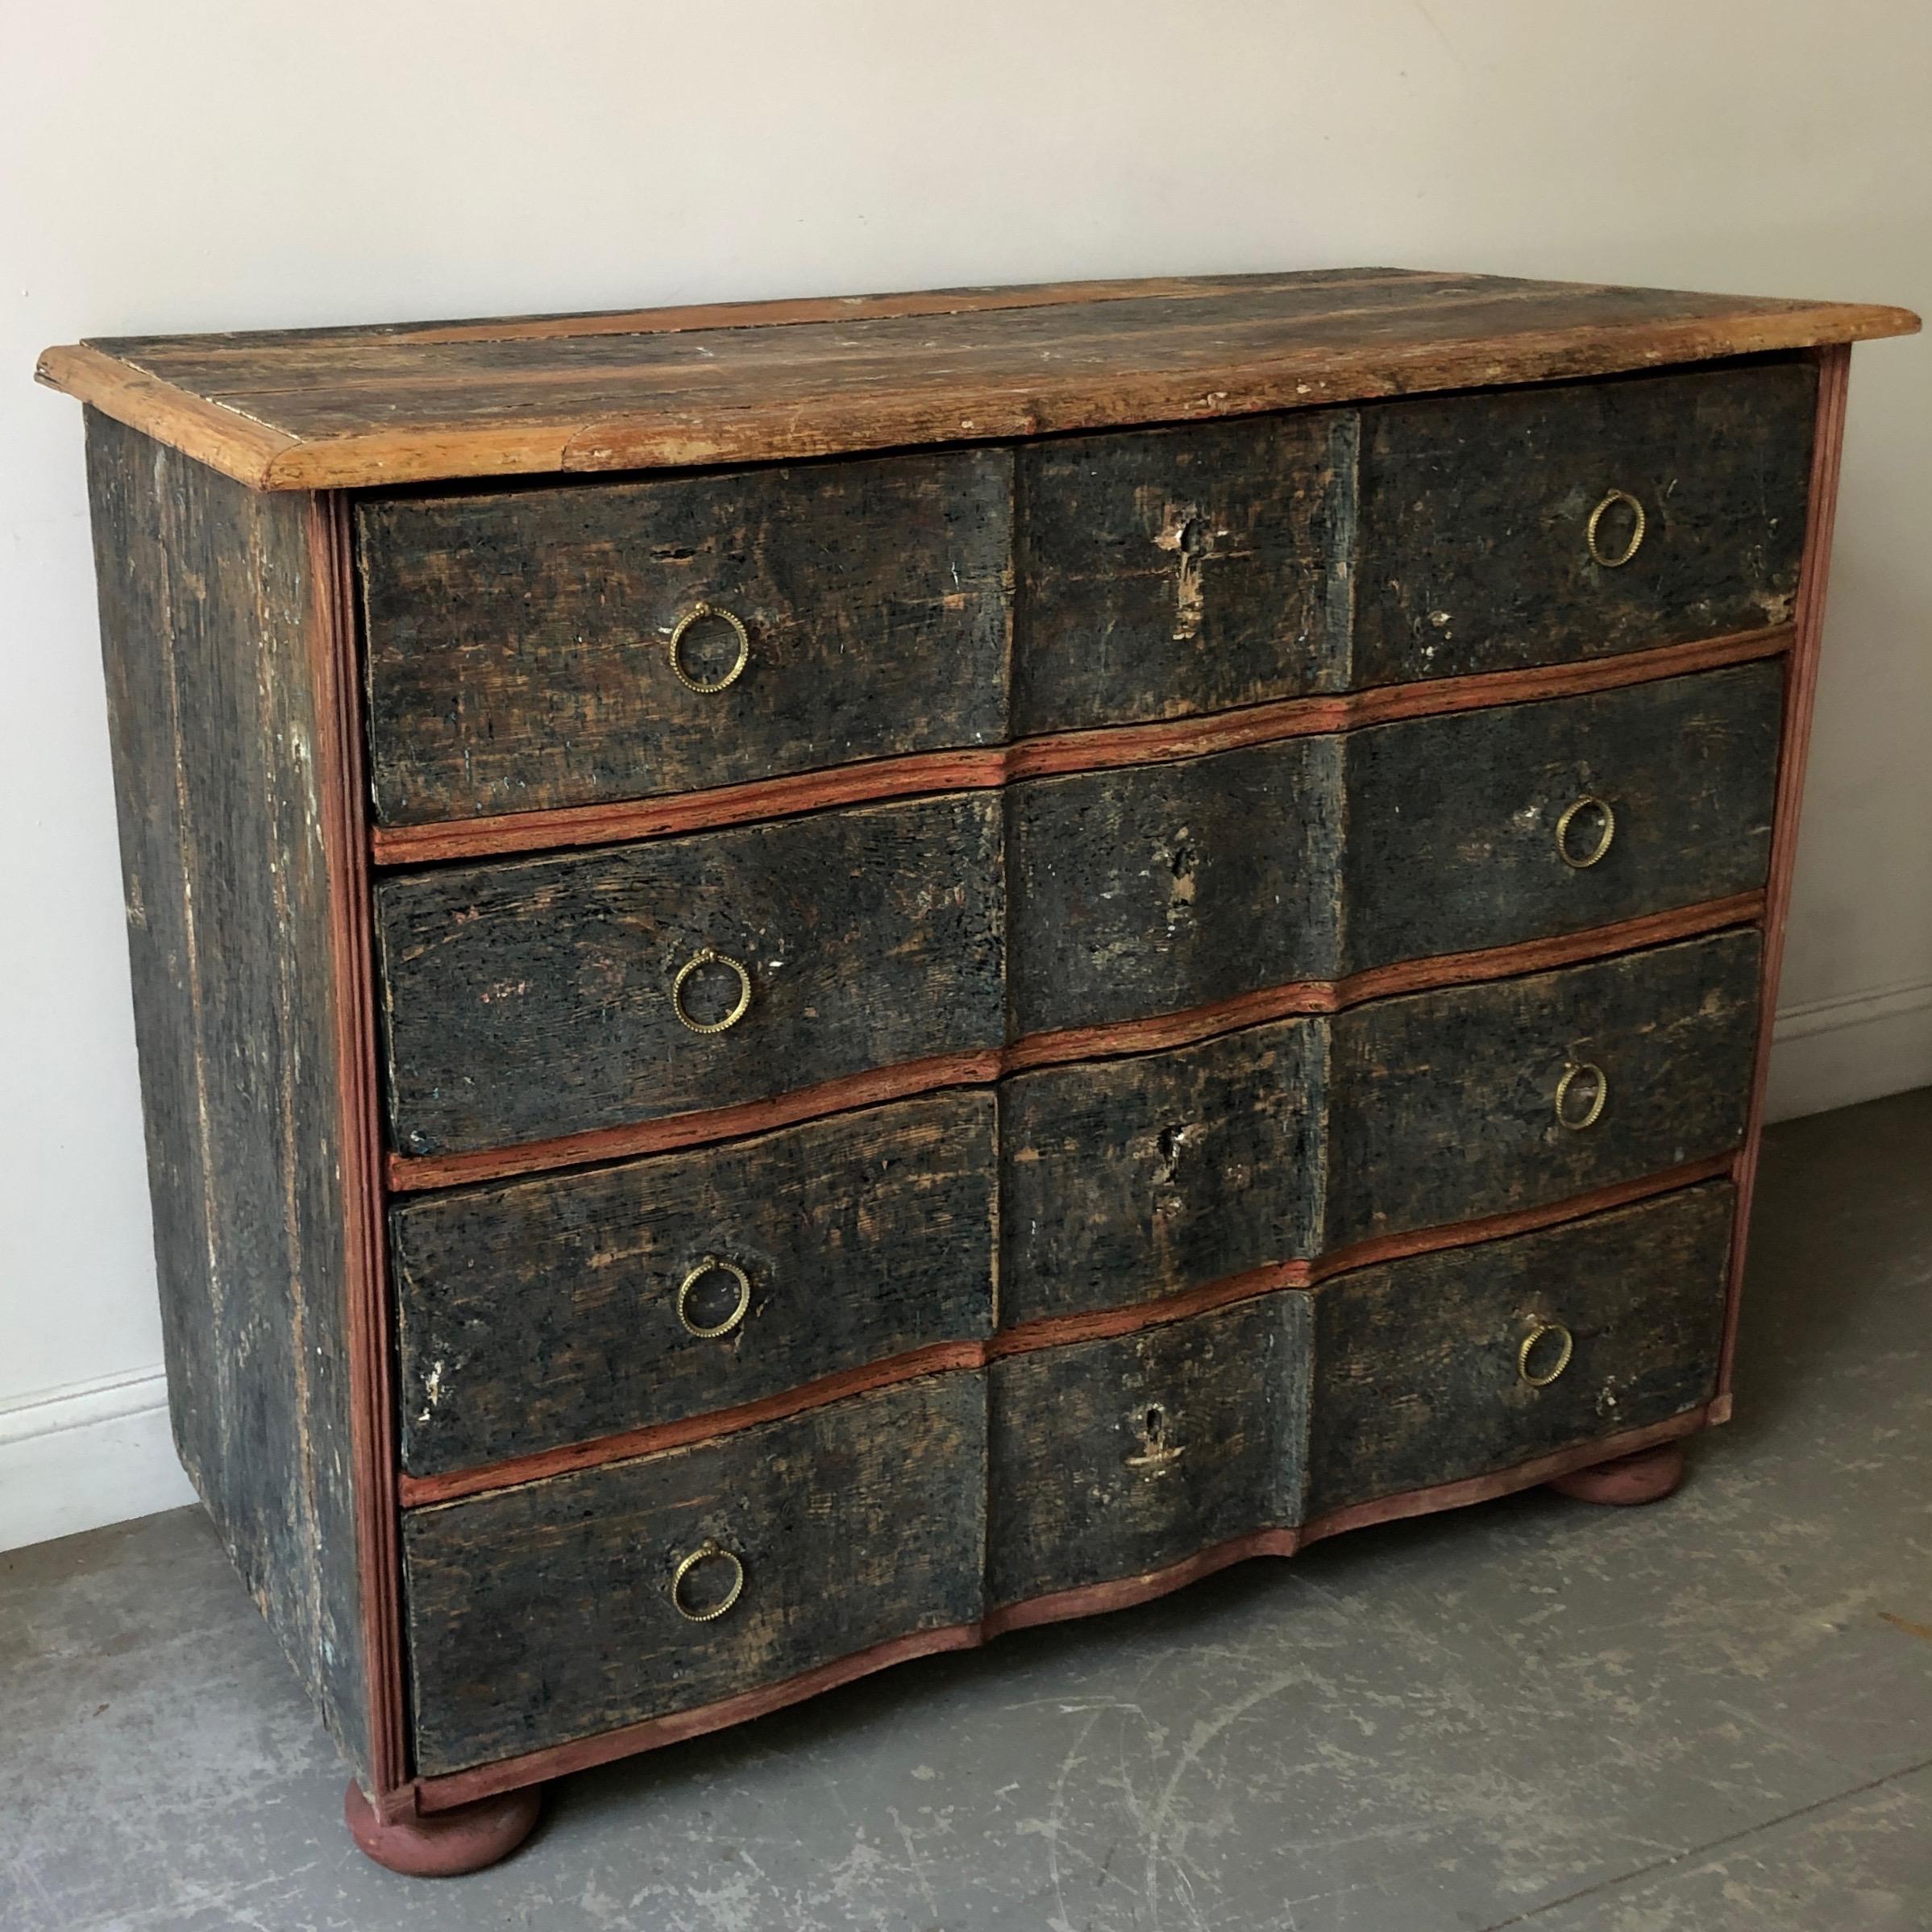 A handsome 19th century Danish serpentine front chest strapped to its original time worn original paint with beautifully carved serpentine drawers.
Denmark, circa 1880.
Surprising pieces and objects, authentic, decorative and rare items. Discover